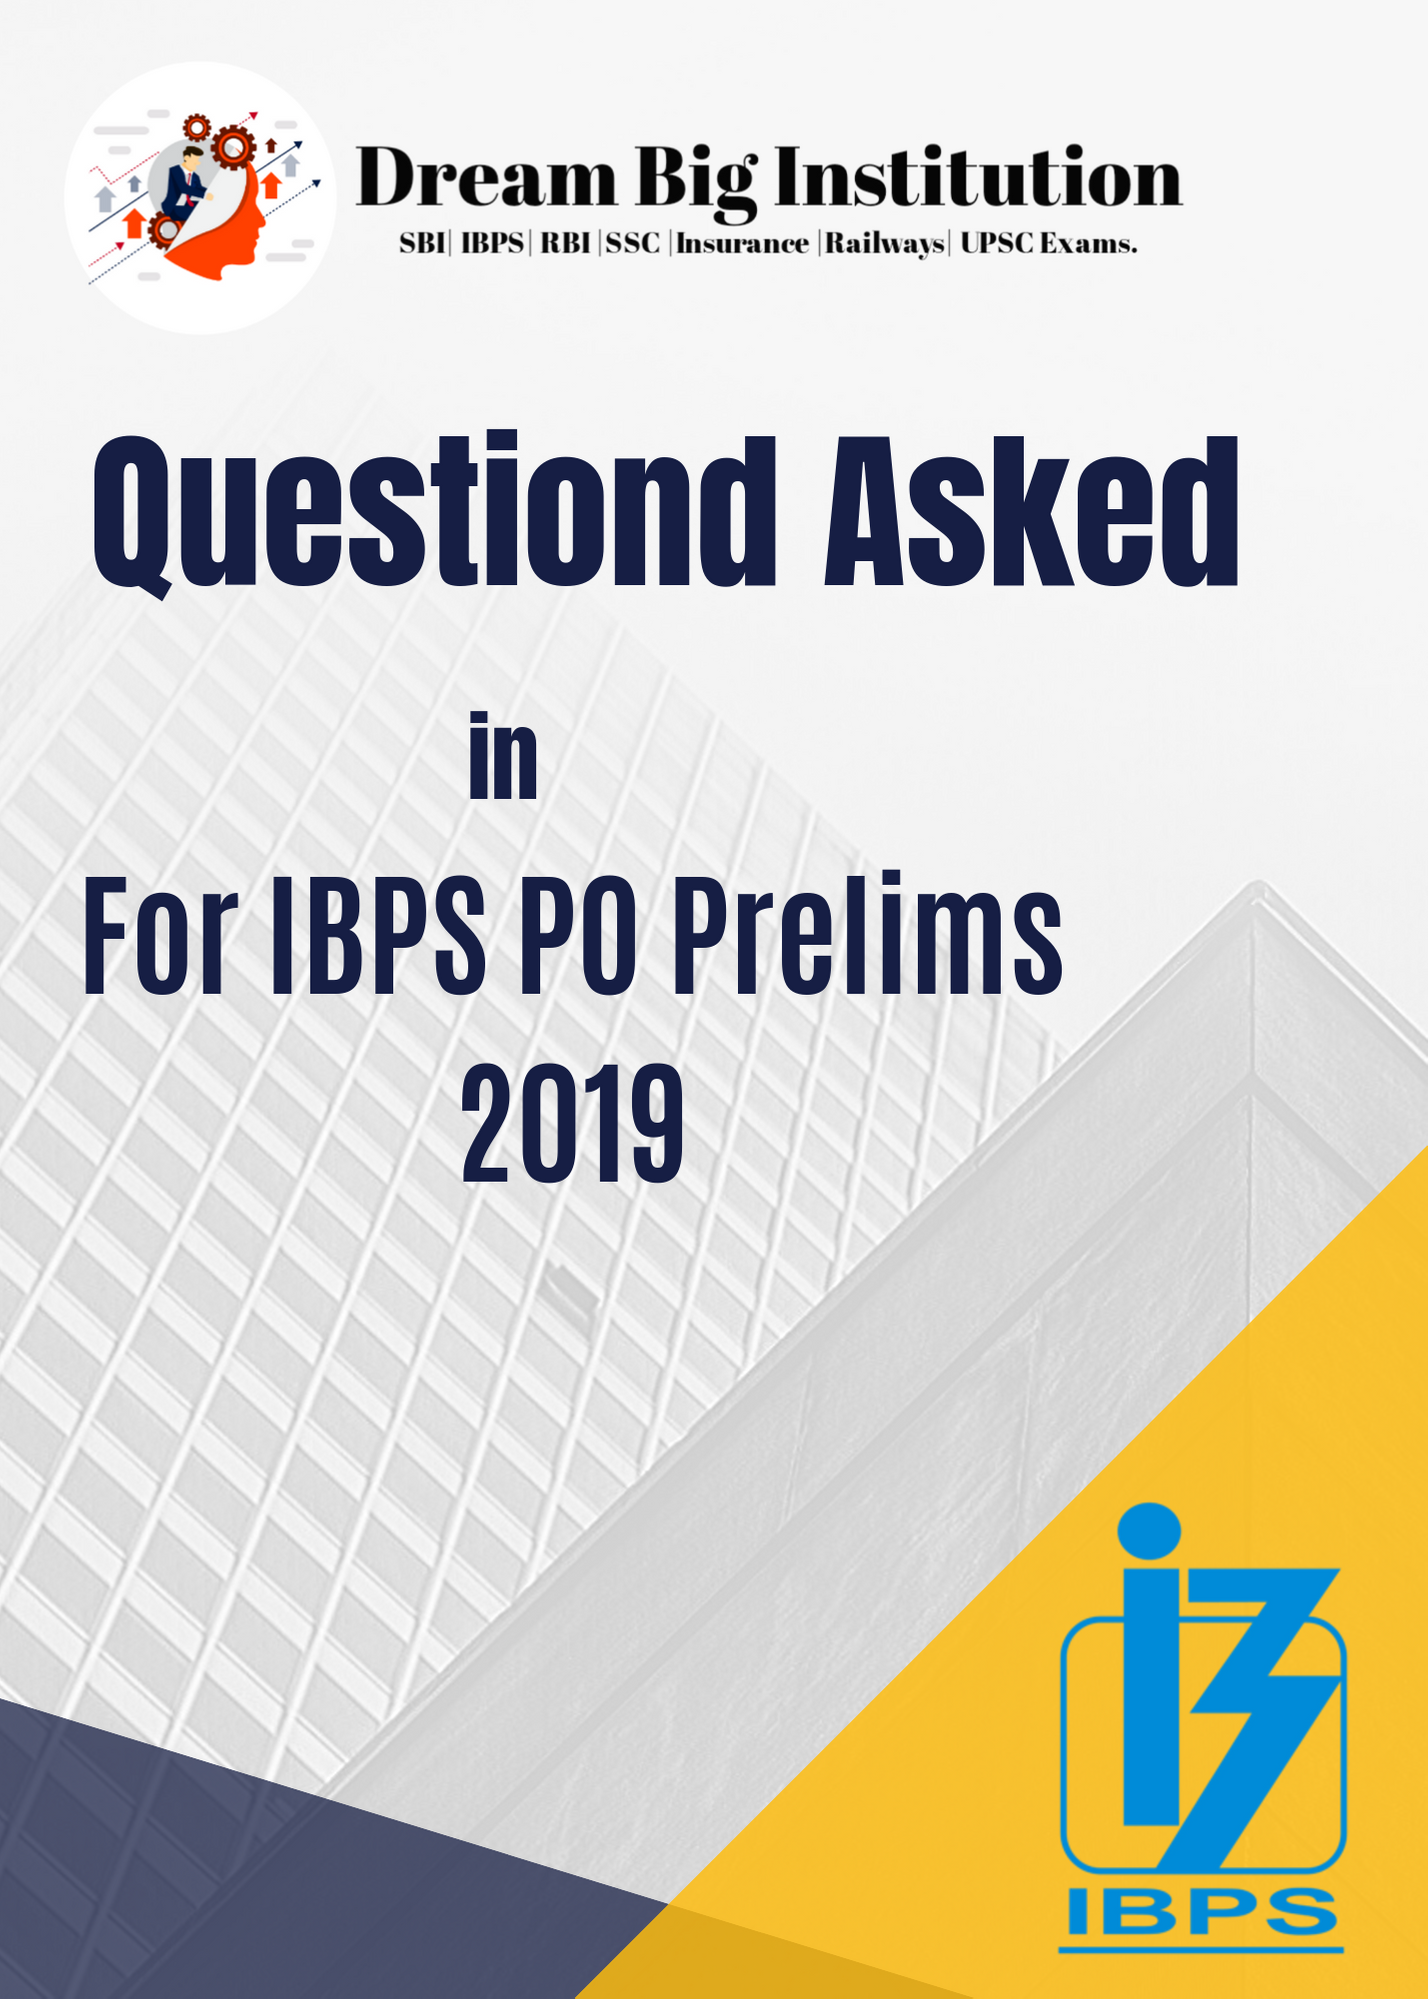 All Questions Asked in IBPS PO Prelims 2019 Exams